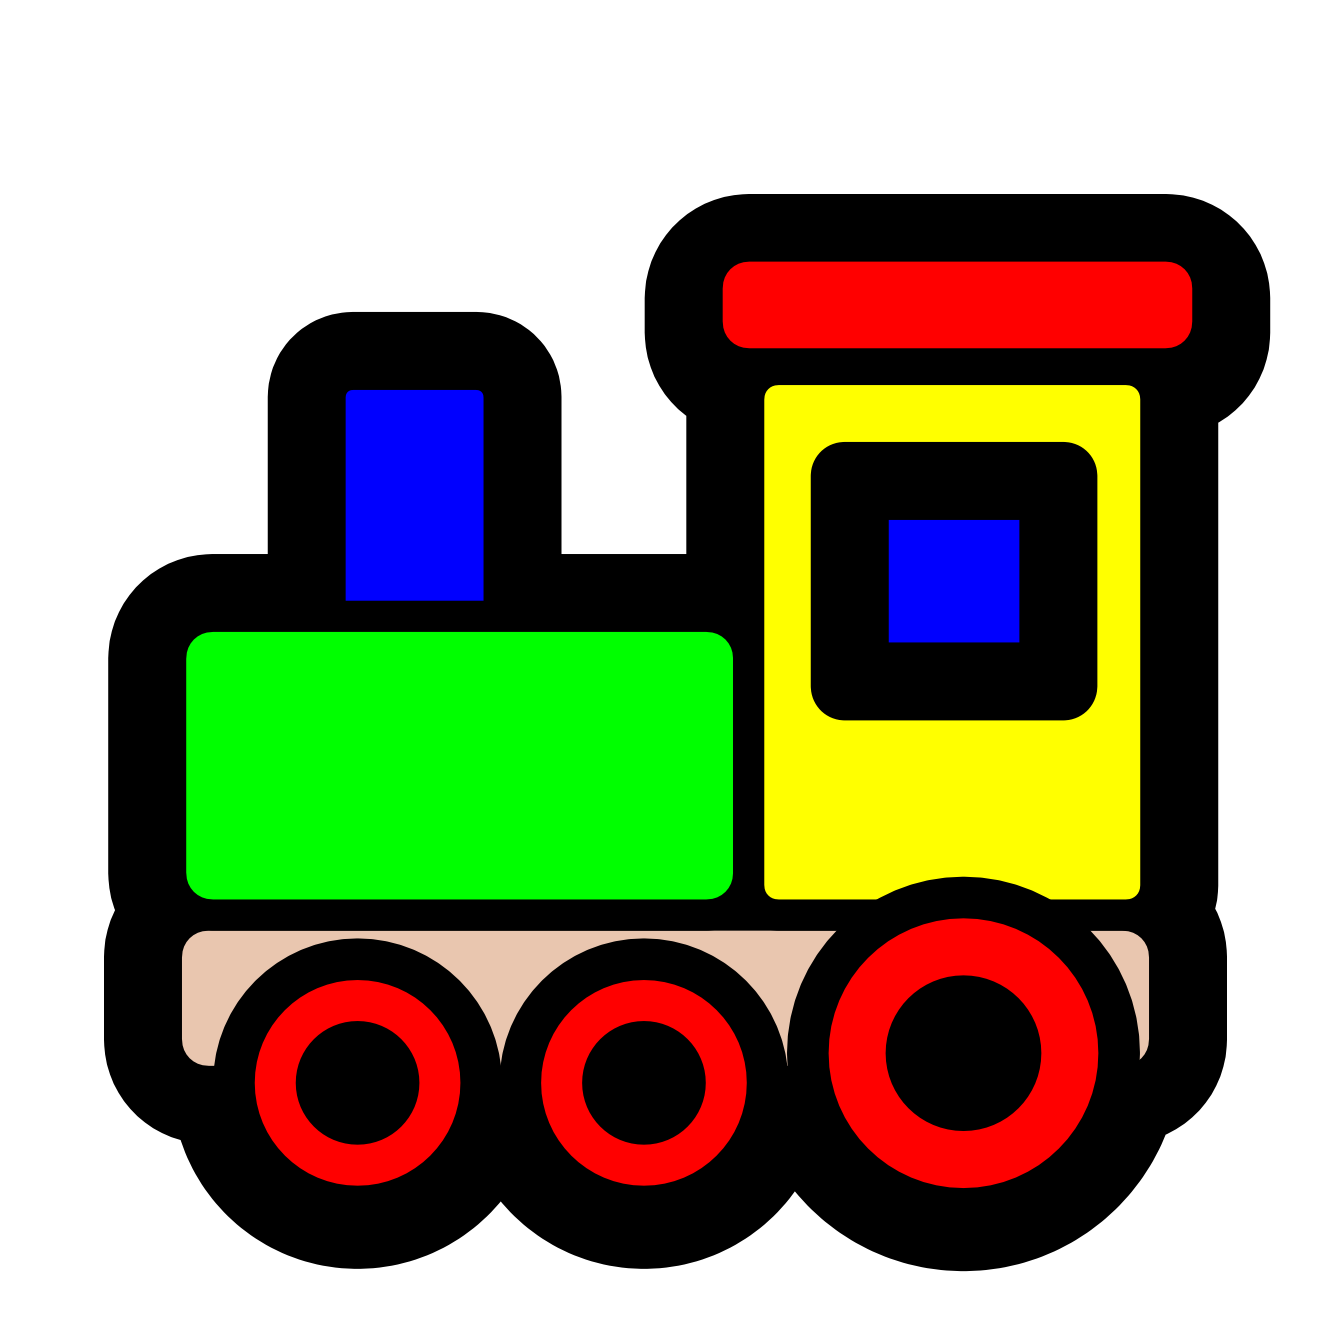 Toy trains image group. Clipart train jpeg